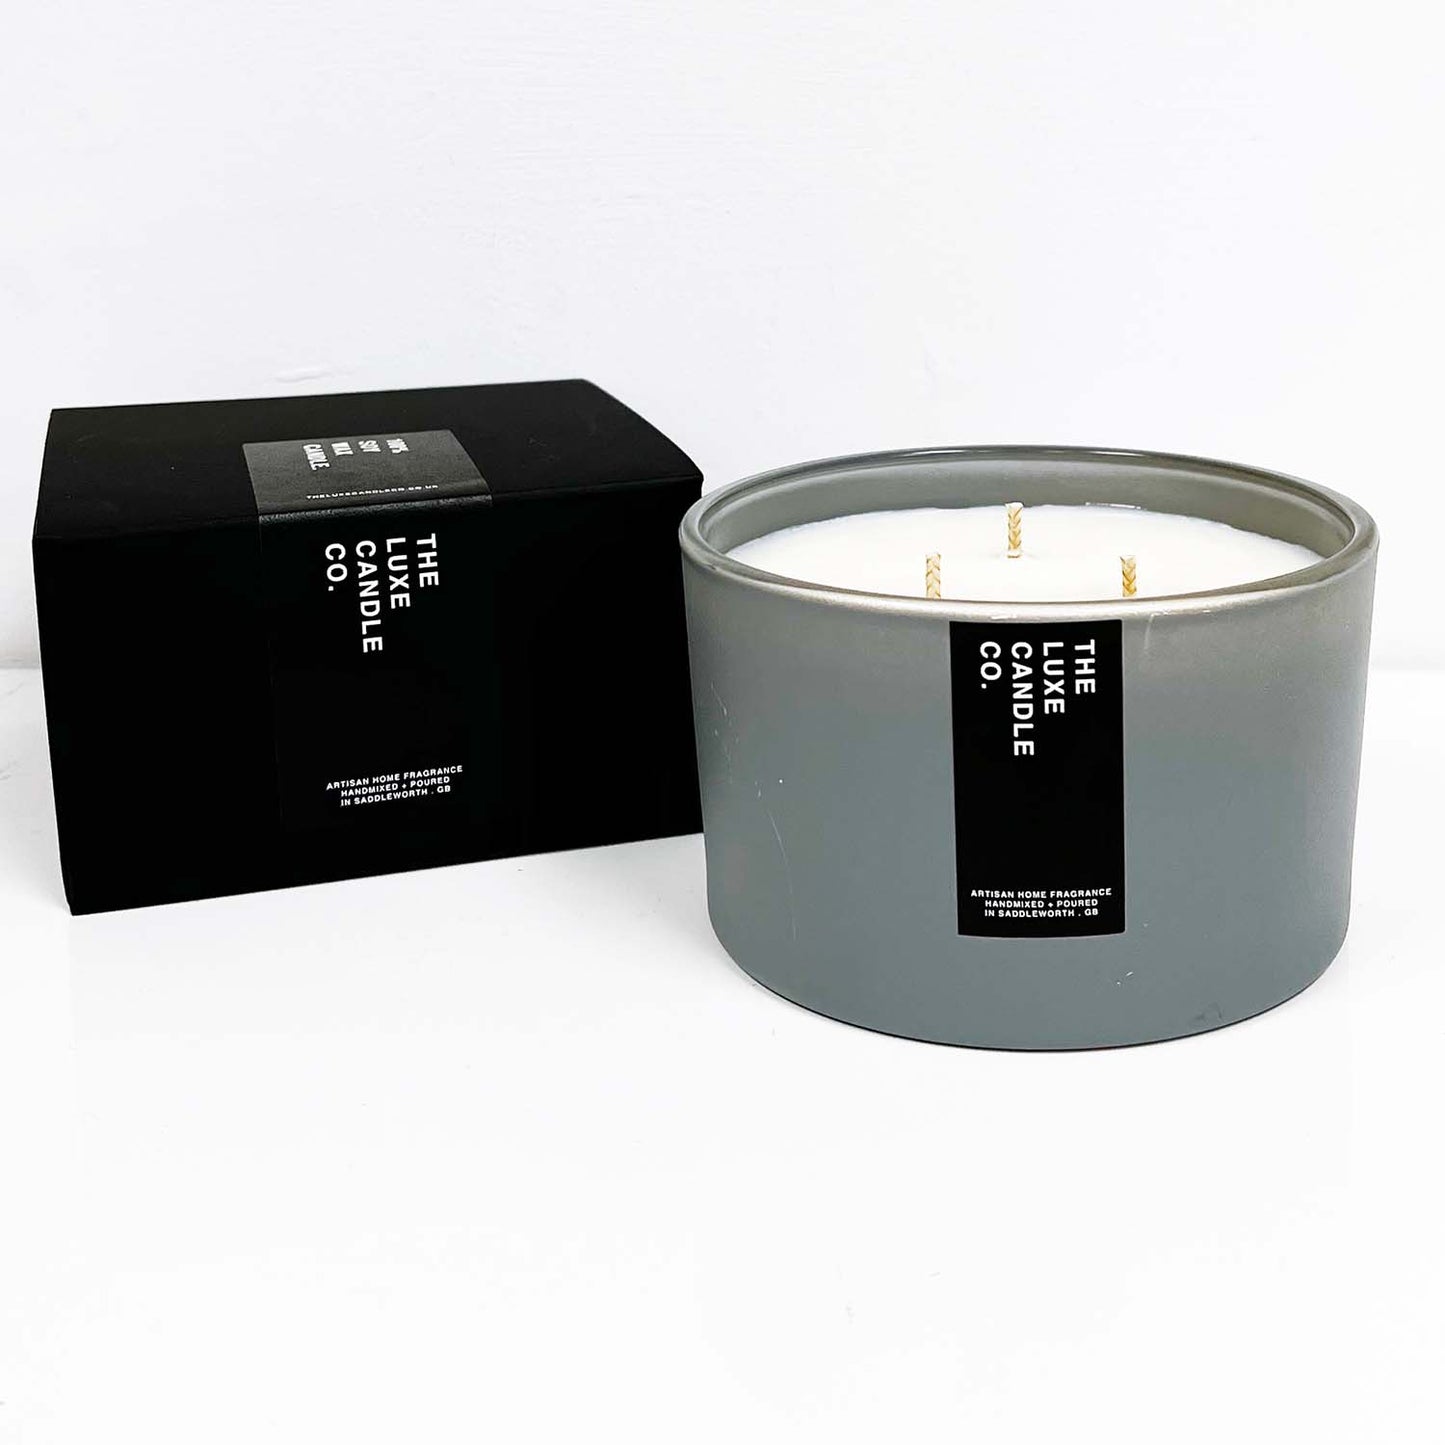 Scented 3 wick extra large candles in grey glass | Large soy wax candle with 3 wicks gift boxed 